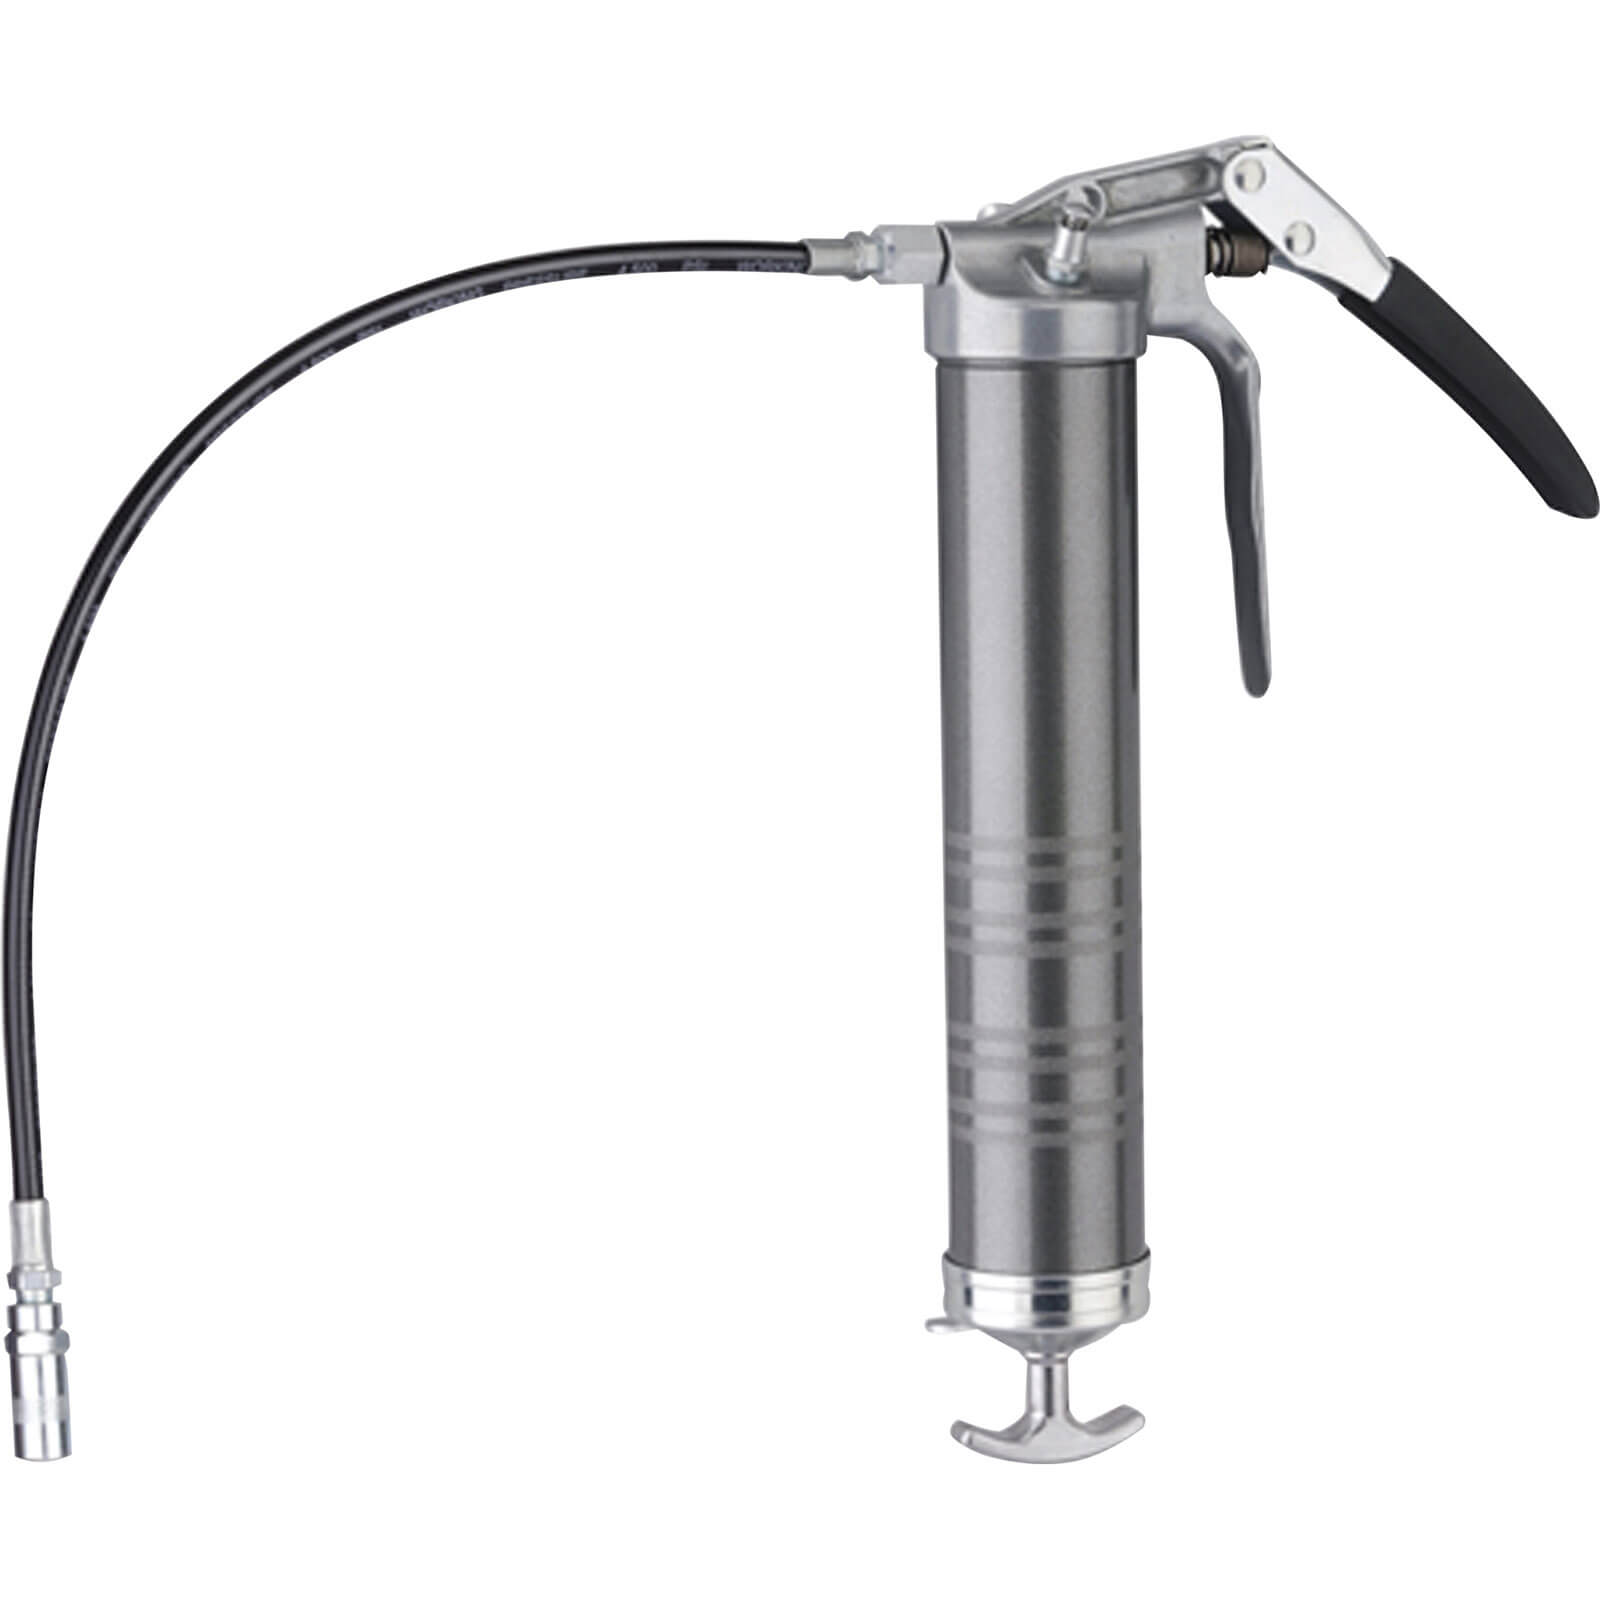 Image of Lumatic Industrial One Handed Grease Gun